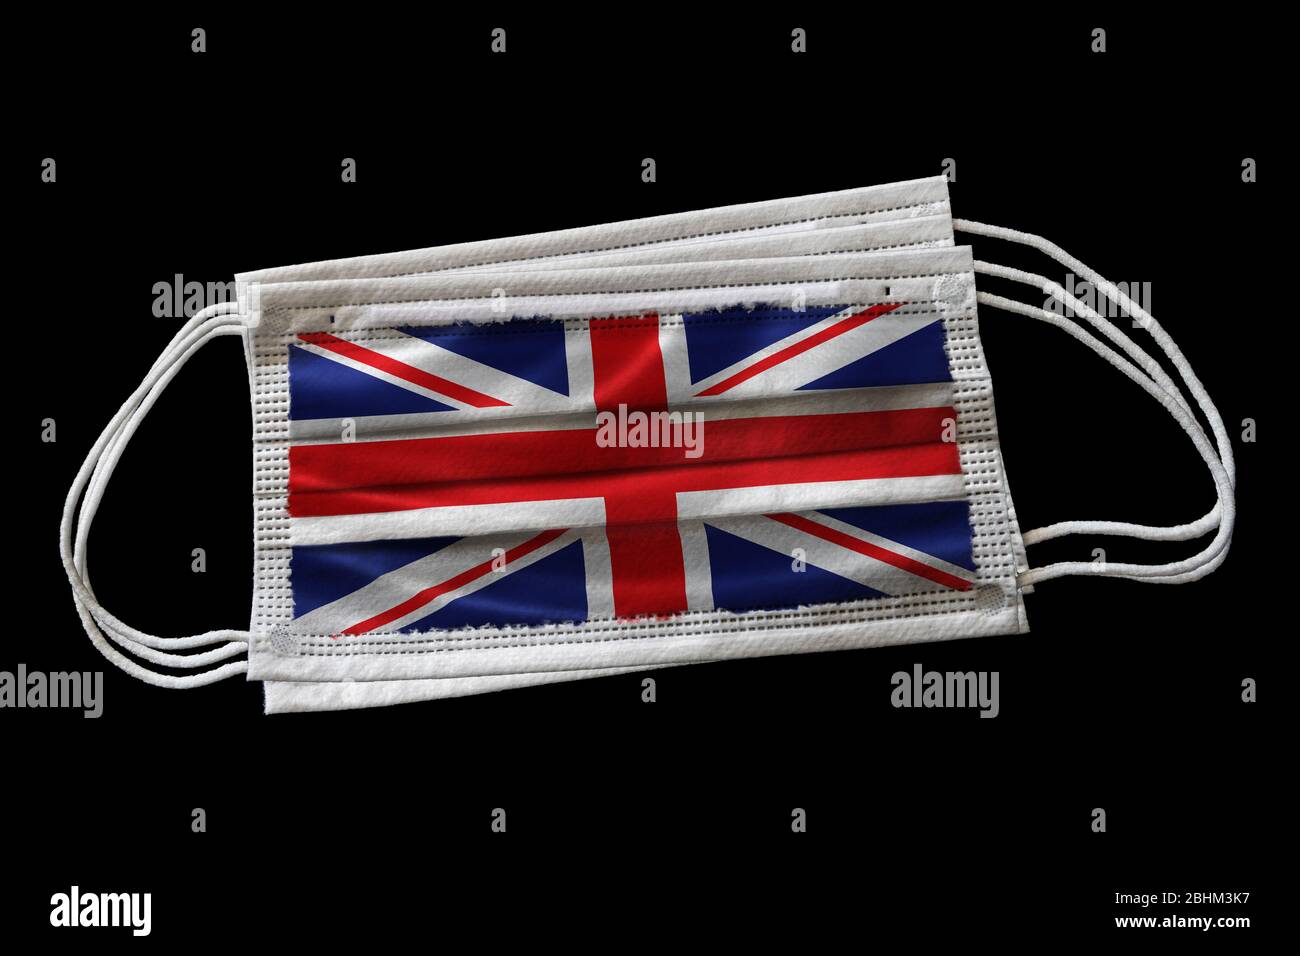 Multiple surgical face masks with UK flag printed. Isolated on black background. Concept of face mask usage in the British effort to combat Covid-19 c Stock Photo